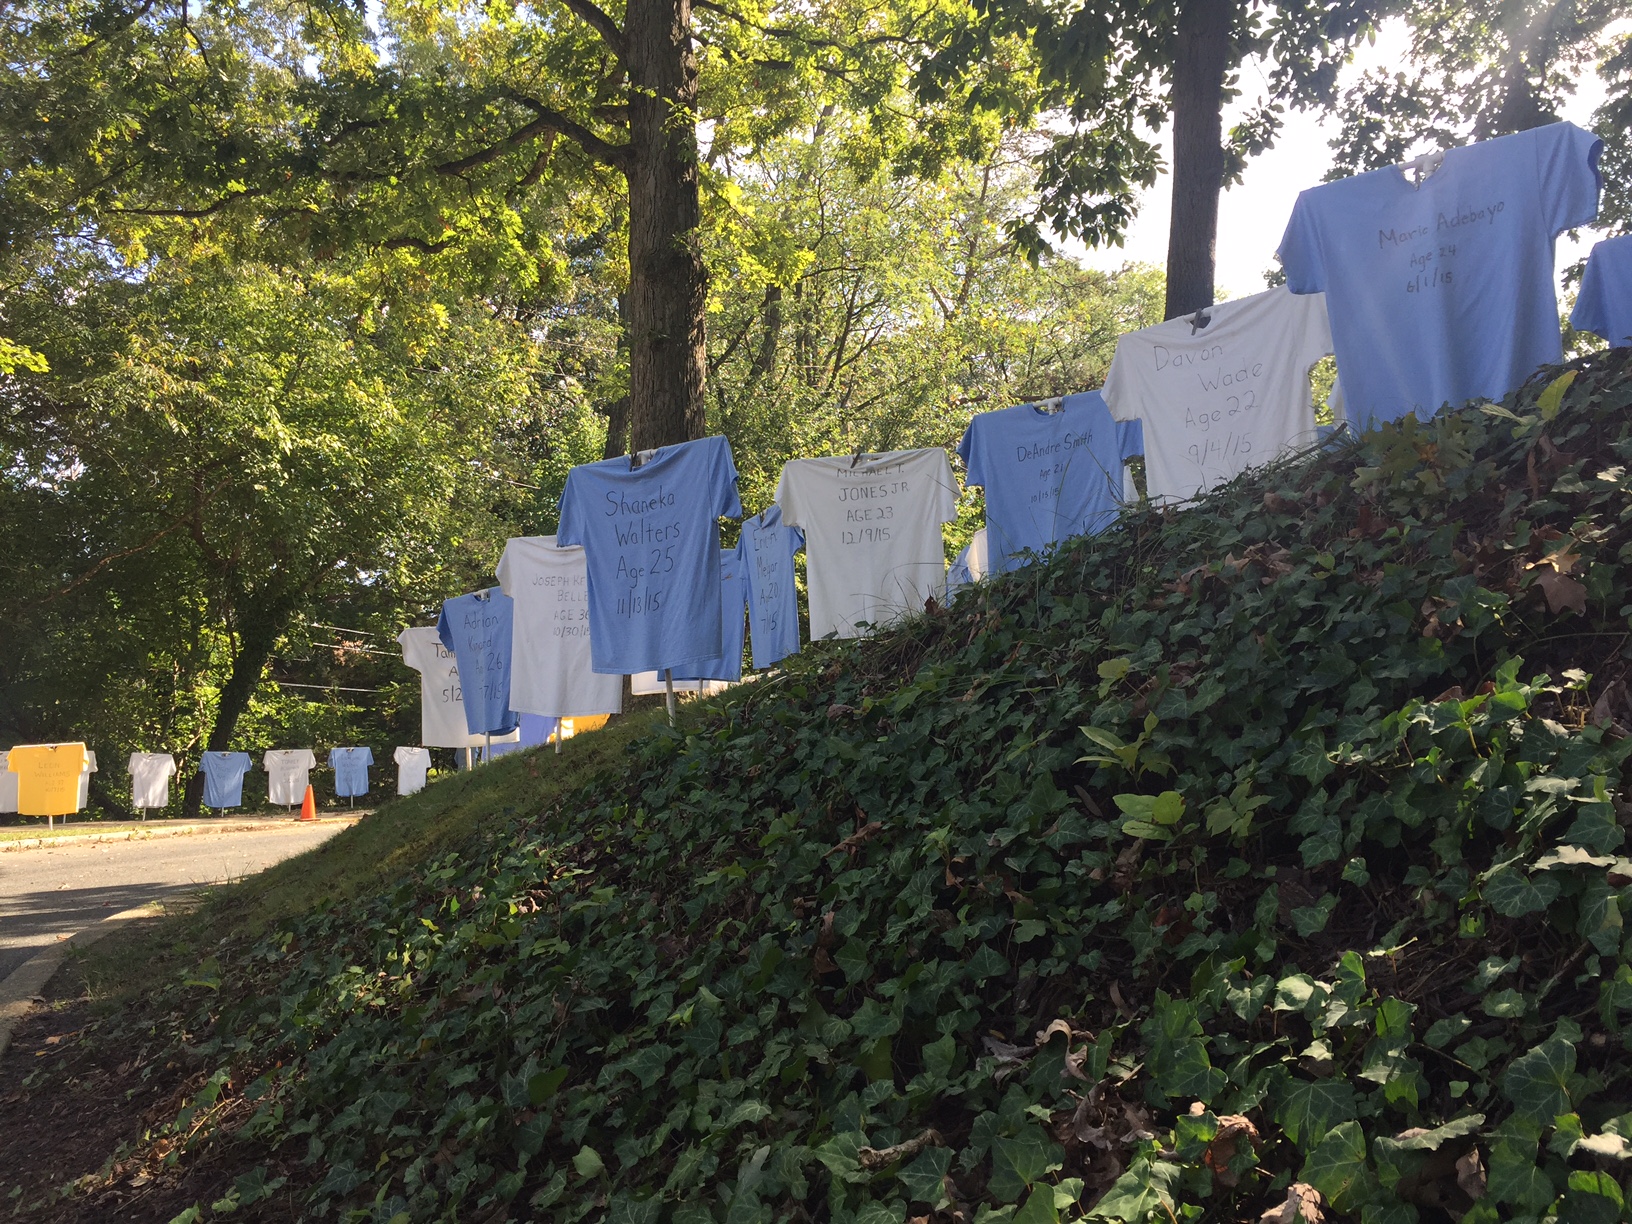 The 200 T-Shirts line both sides of the driveway up to the temple. (WTOP/Megan Cloherty)